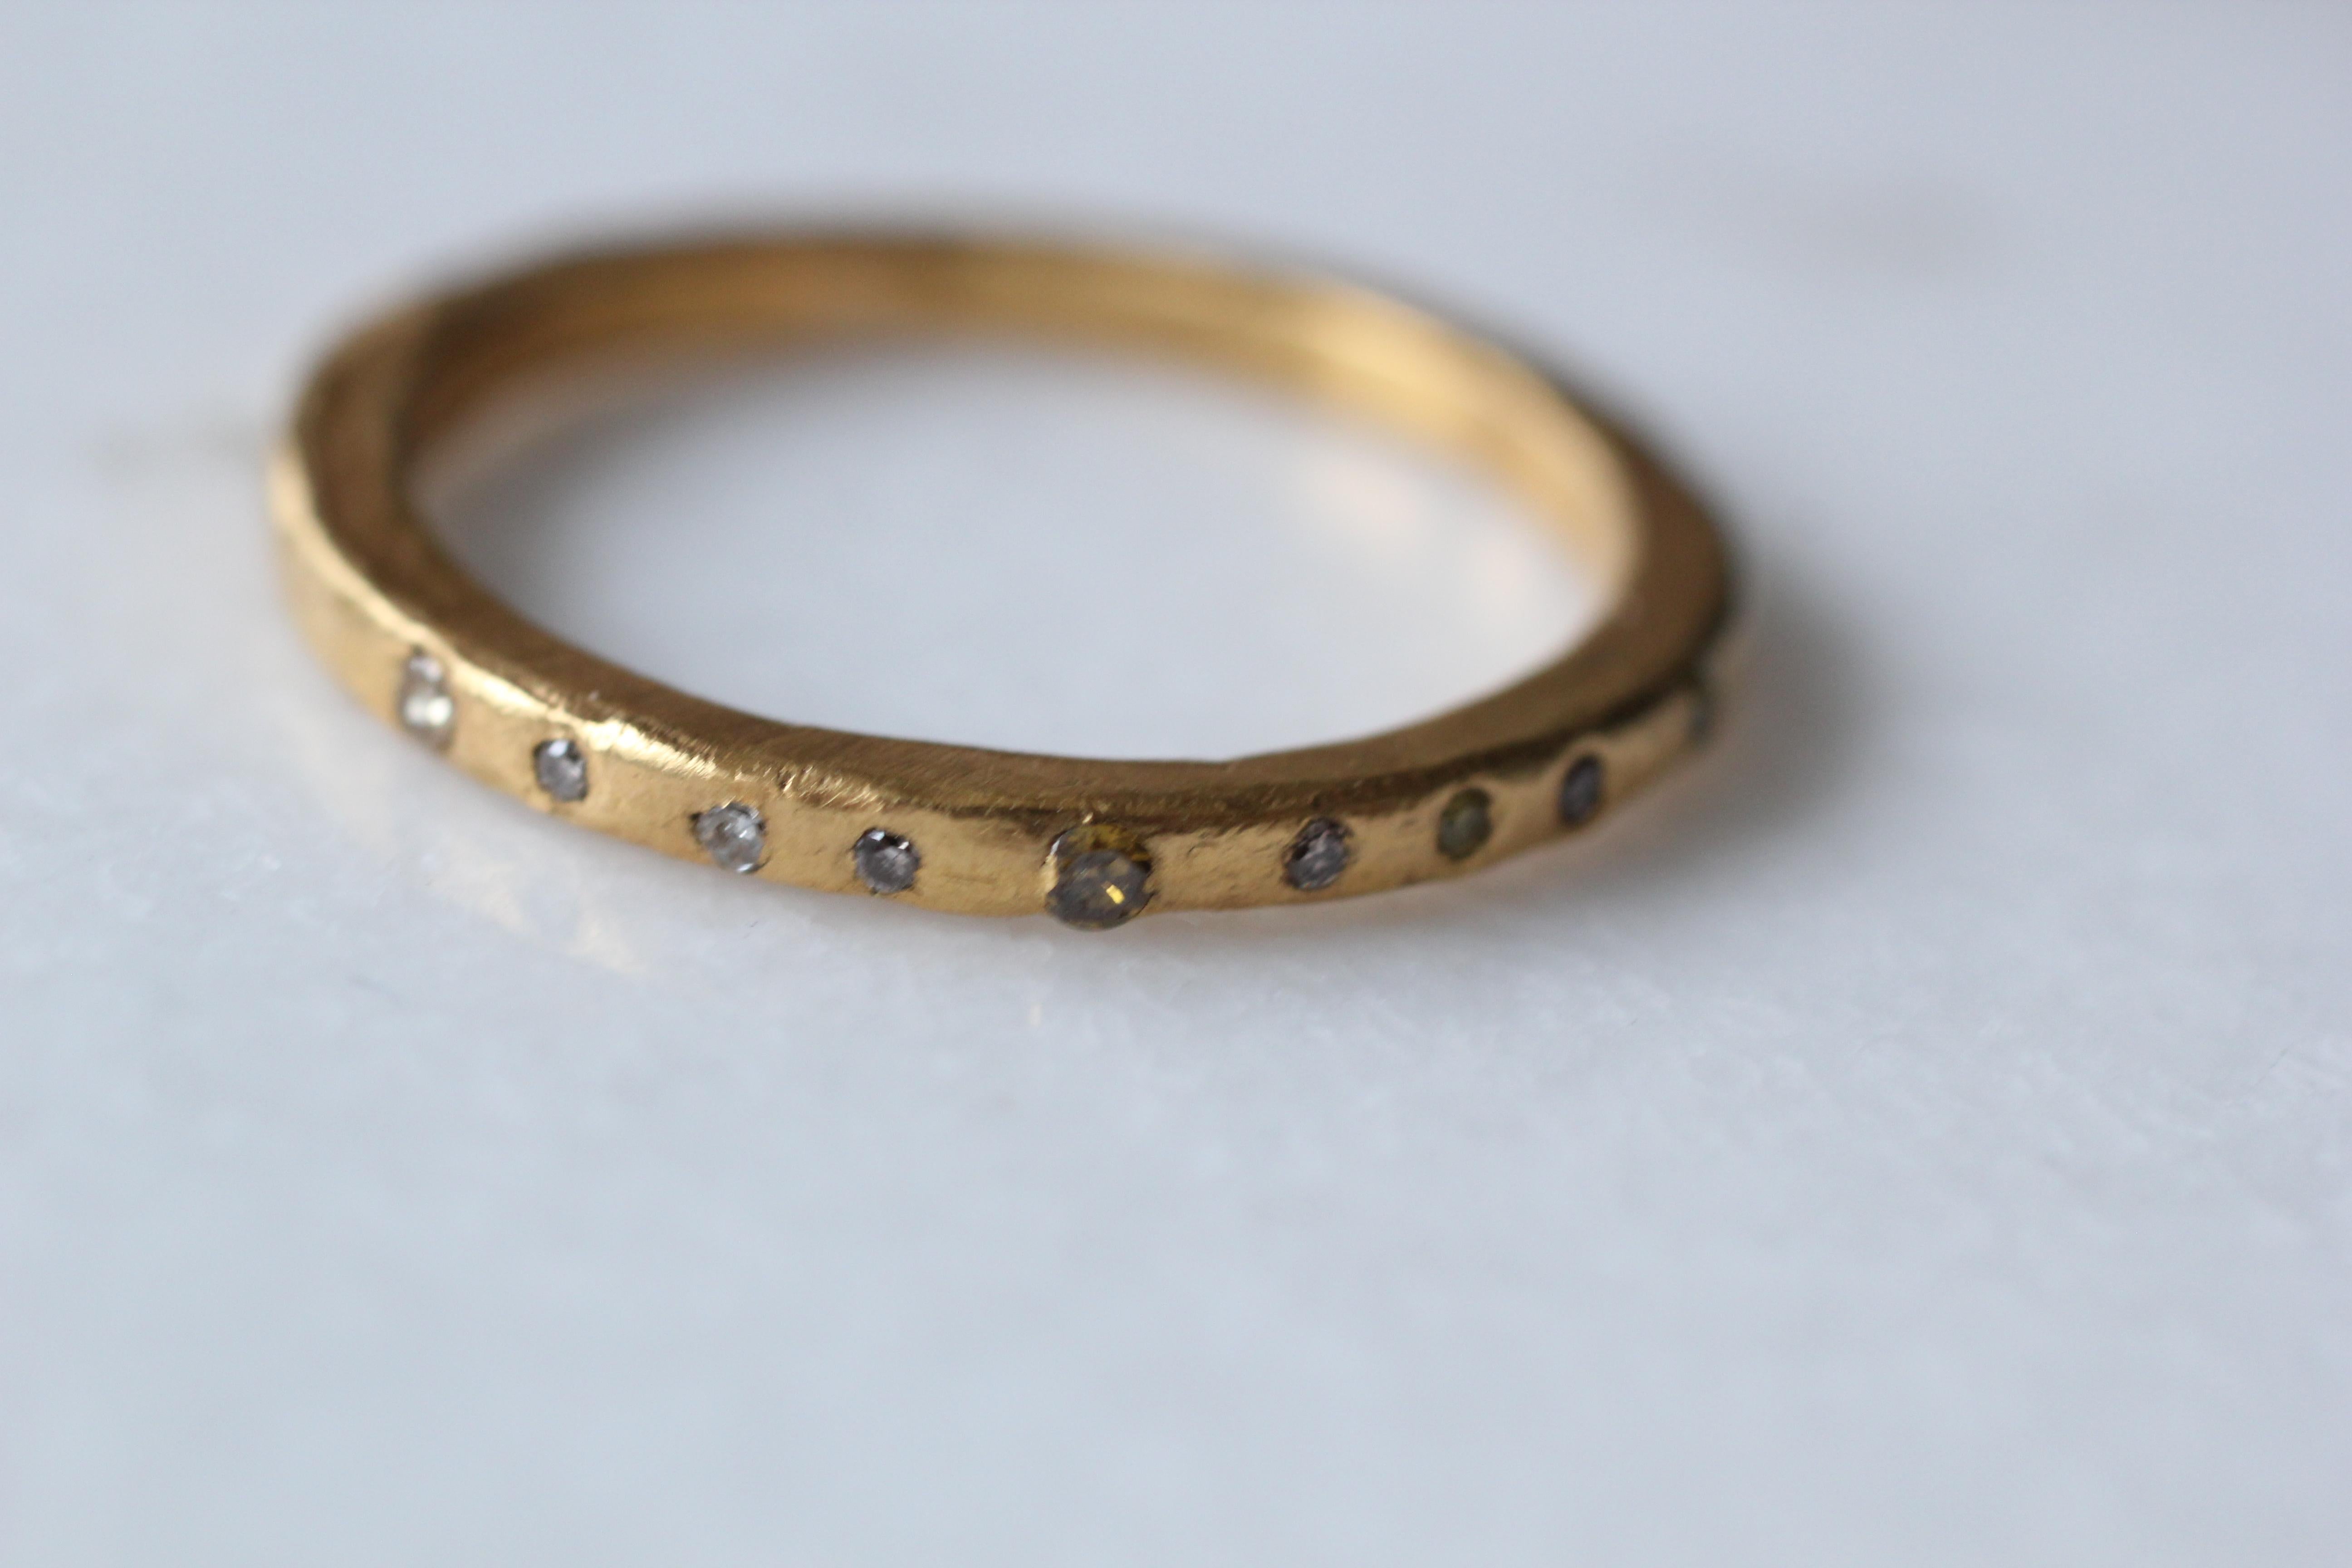 A handmade bridal or fashion ring in a 21k gold set with 9 colored diamonds. Simplicity Small Band contemporary unisex design with 9 diamonds. Wear it alone or stacked combining it with our other AB Jewelry NYC ring designs to create a unique and